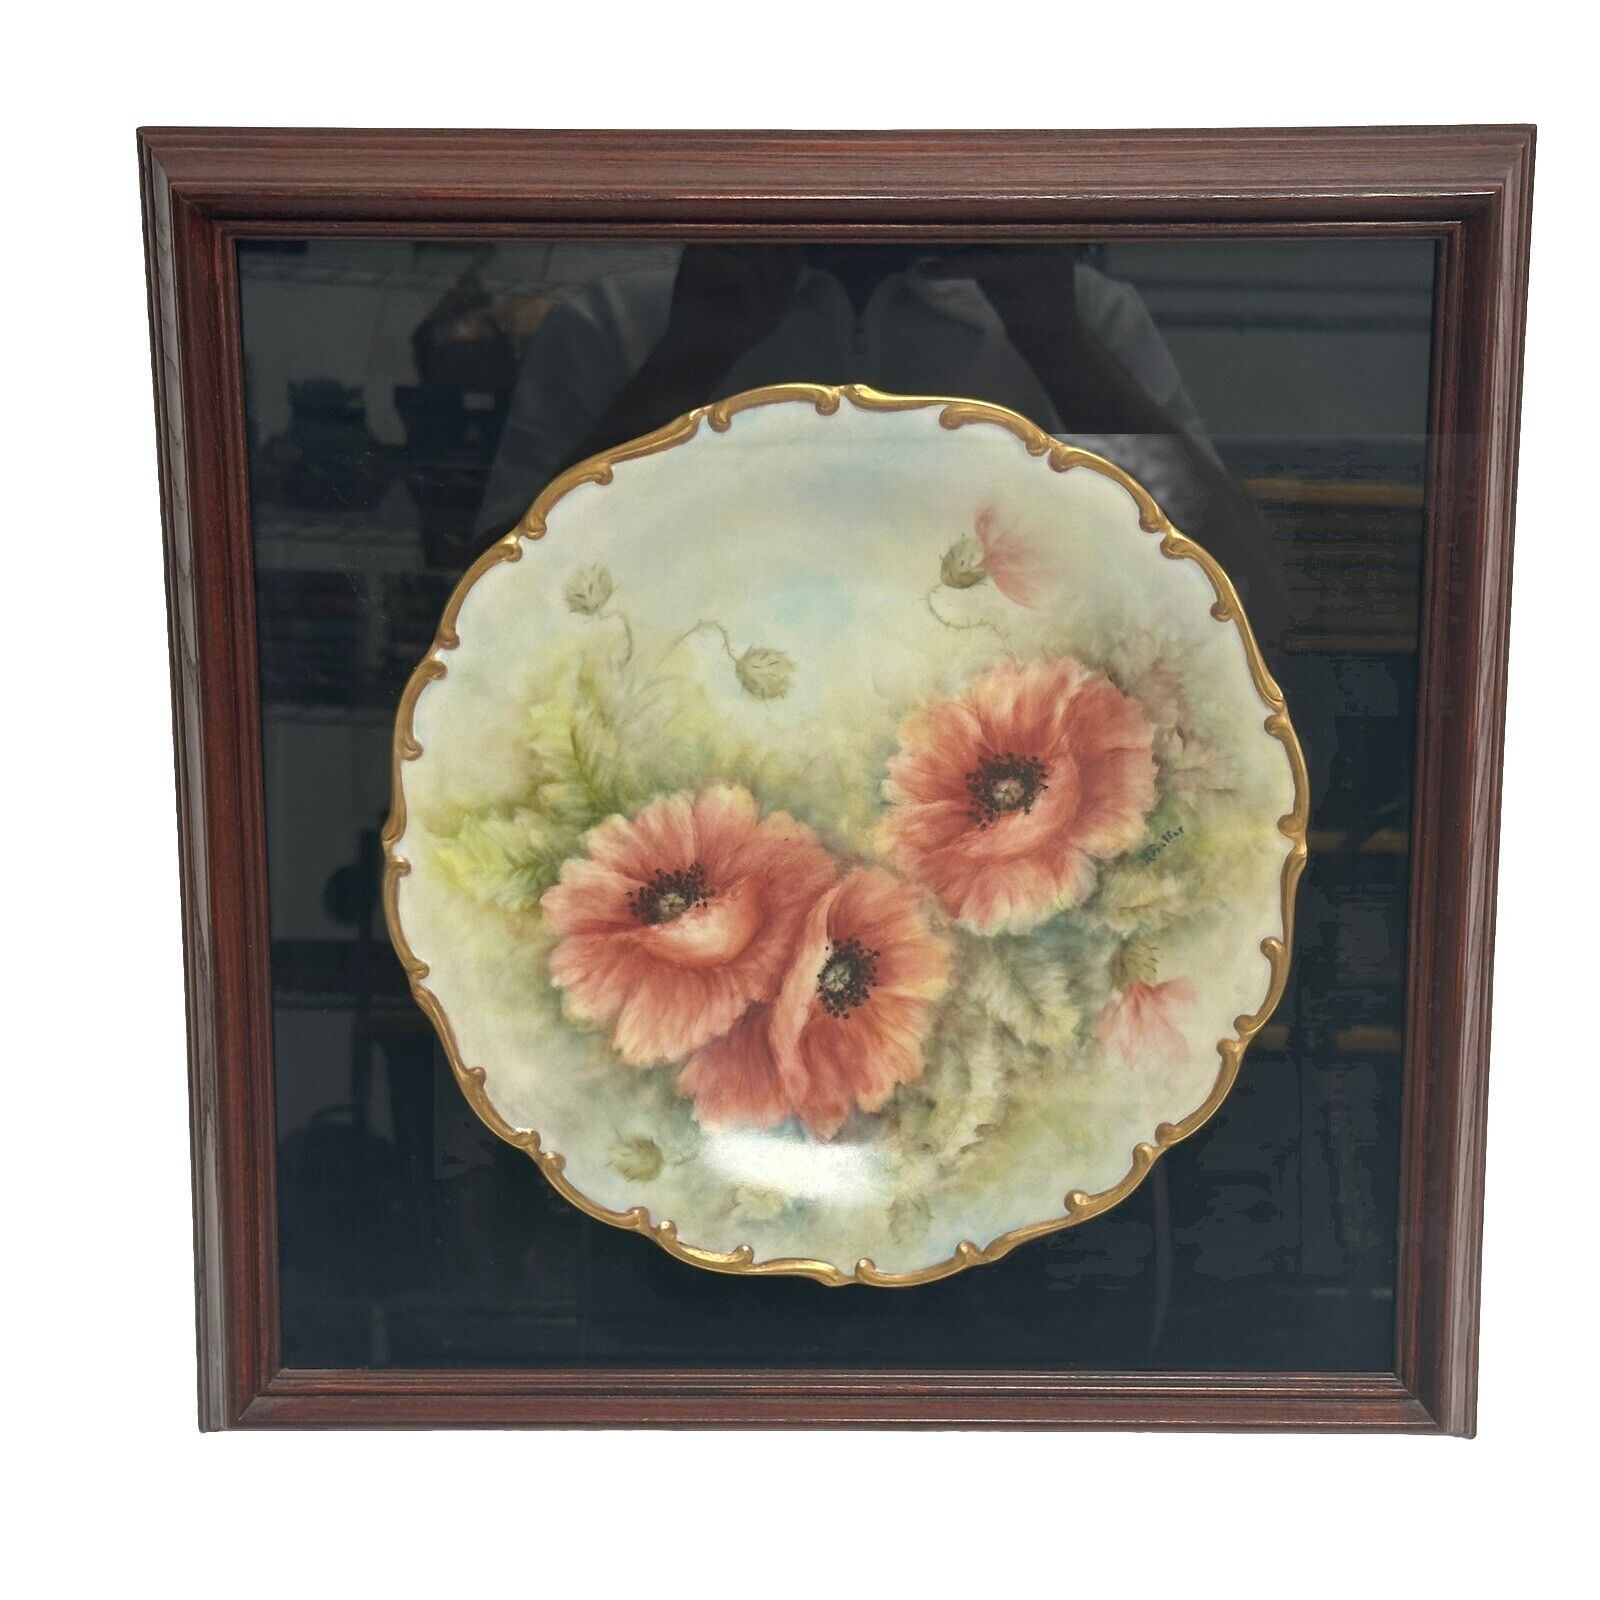 Vintage Schumann Arzberg Hand Painted Collector Plate